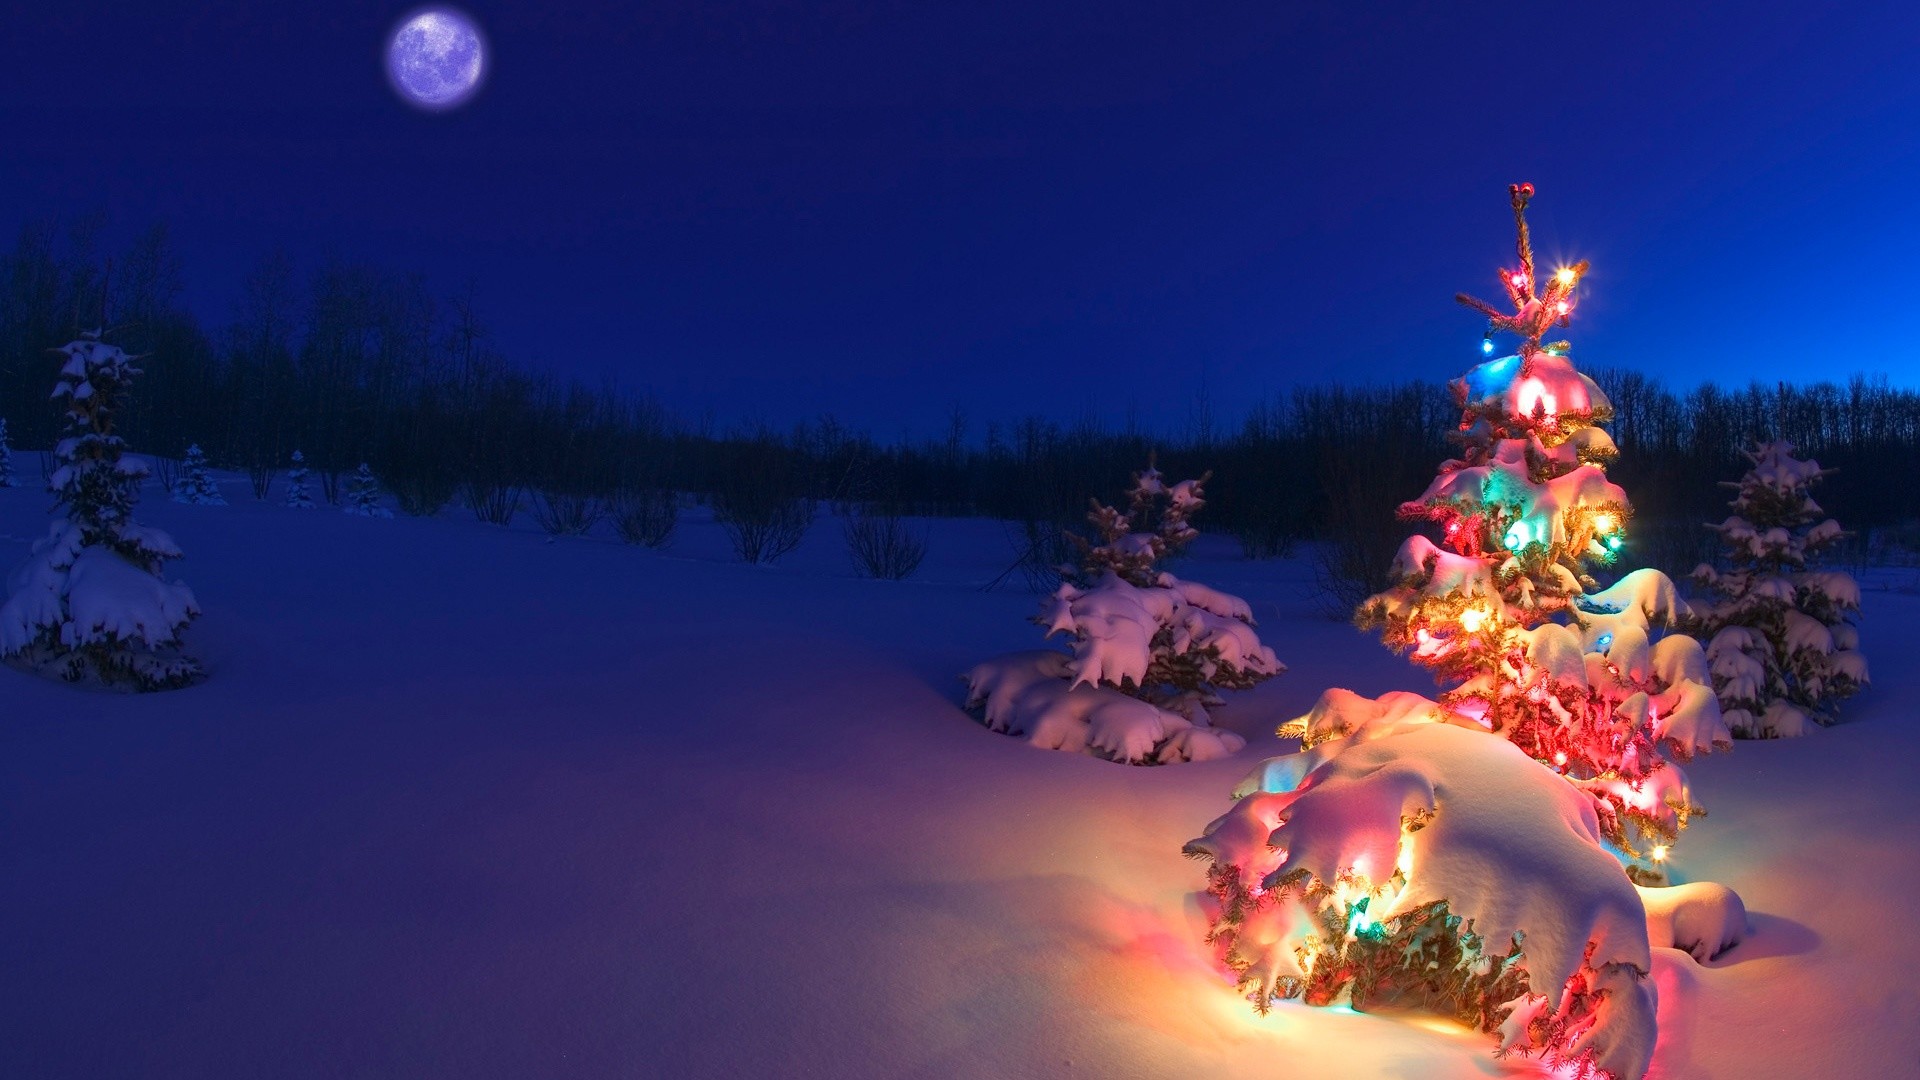 1920x1080 Lightning christmas tree in the snow - HD winter wallpaper. Christmas,  Easter, Valentine's Day and many other holidays Wallpapers